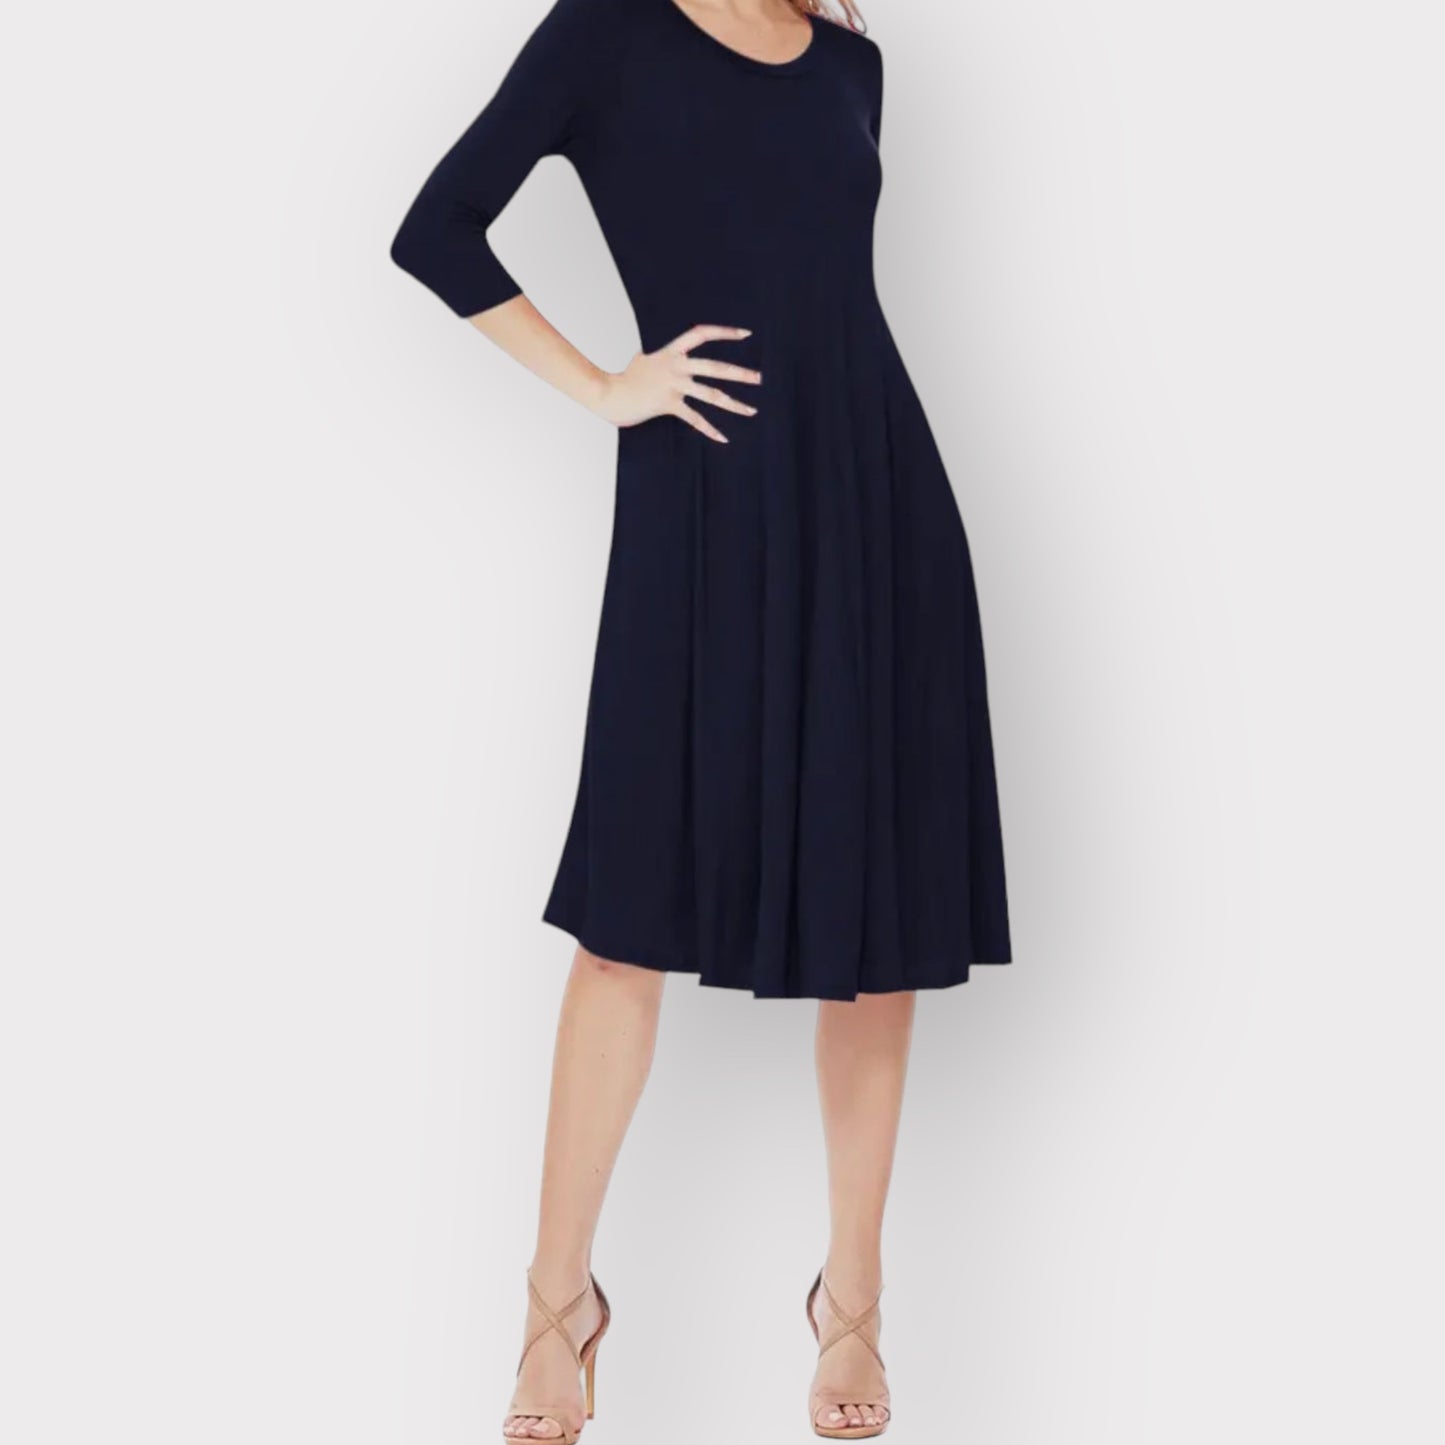 Solid Jersey Knit Relaxed Fit Mid-Length Dress - Black